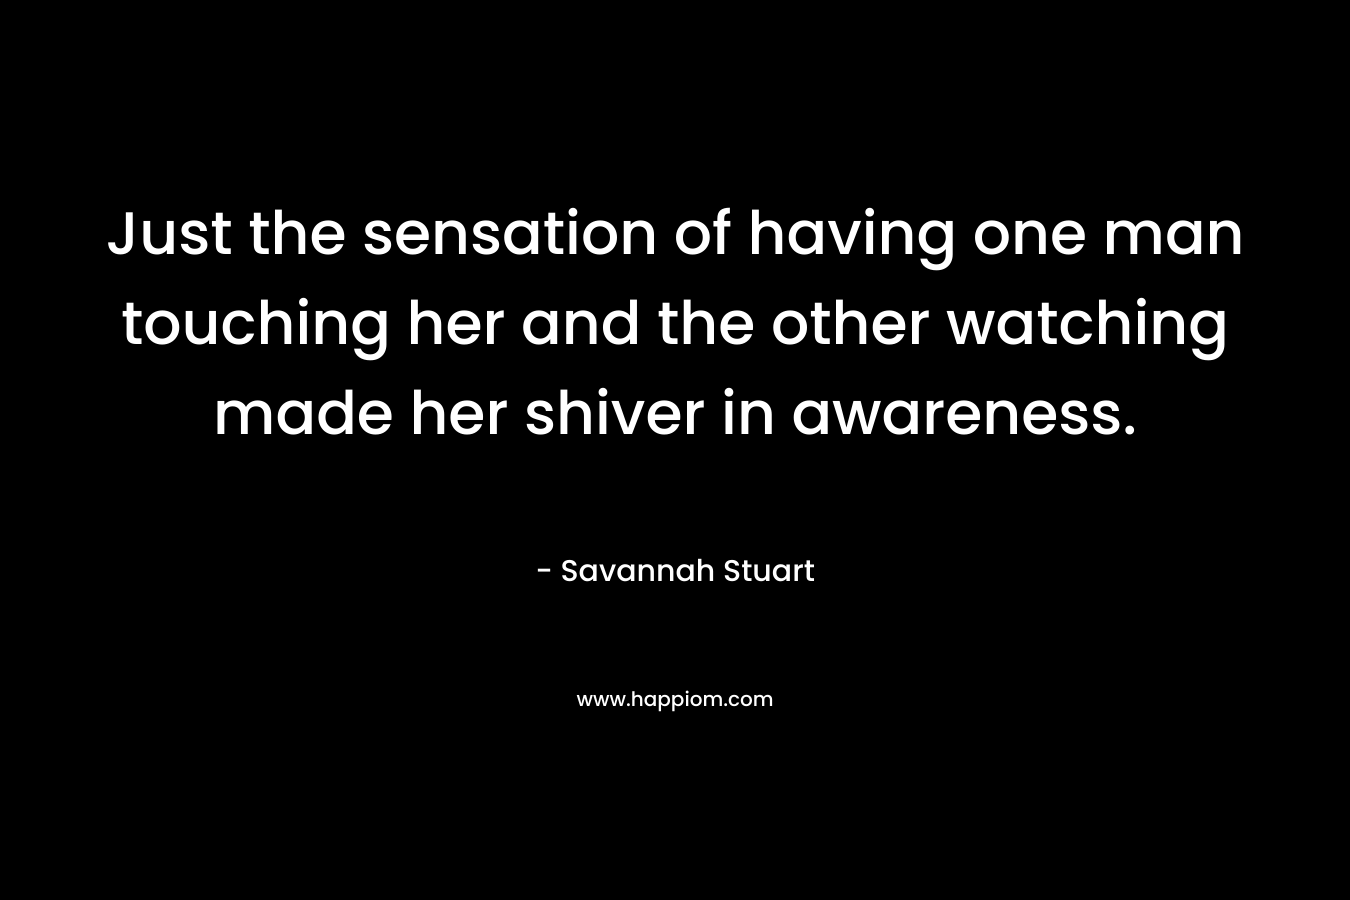 Just the sensation of having one man touching her and the other watching made her shiver in awareness.